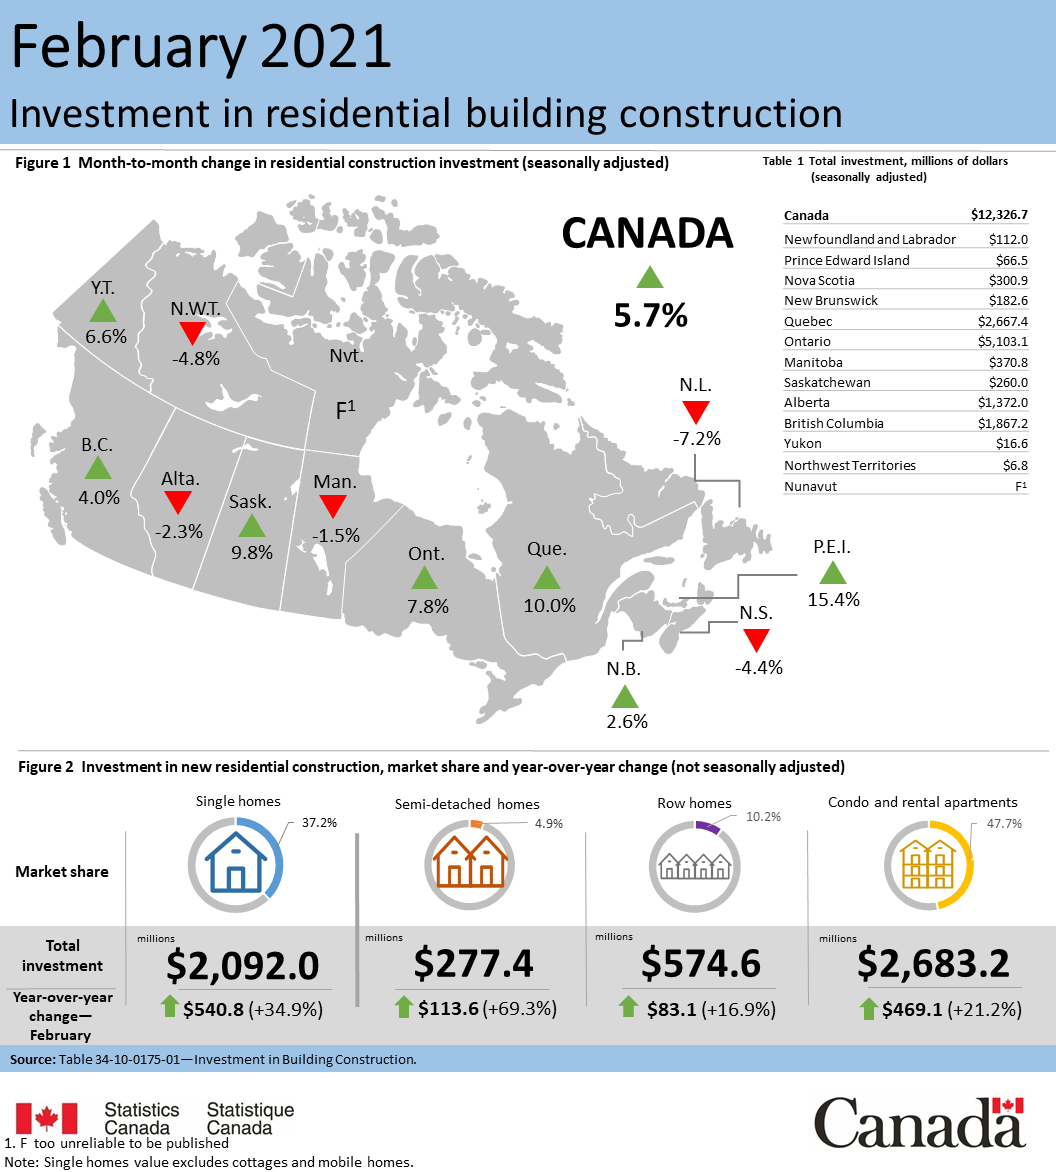 Thumbnail for Infographic 1: Investment in residential building construction, February 2021